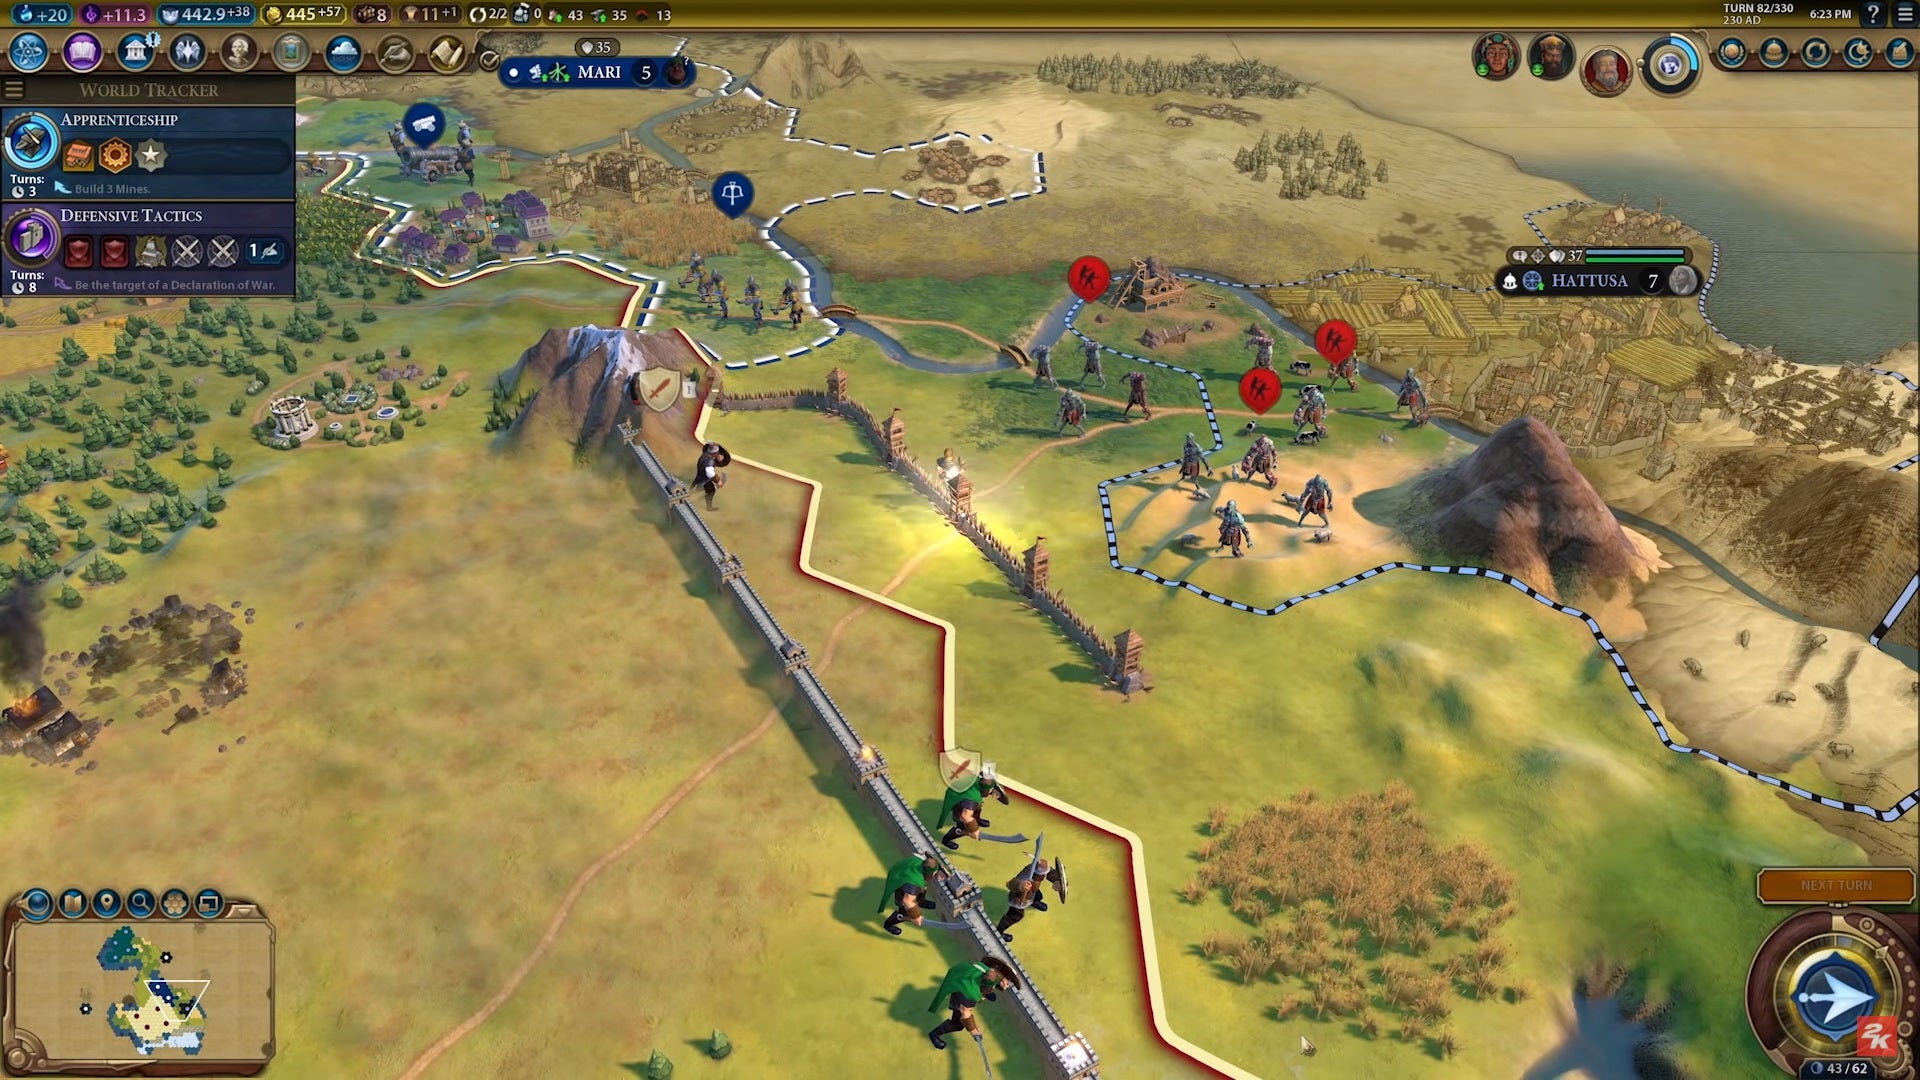 Zombies outside some city defences in Civilization 6.